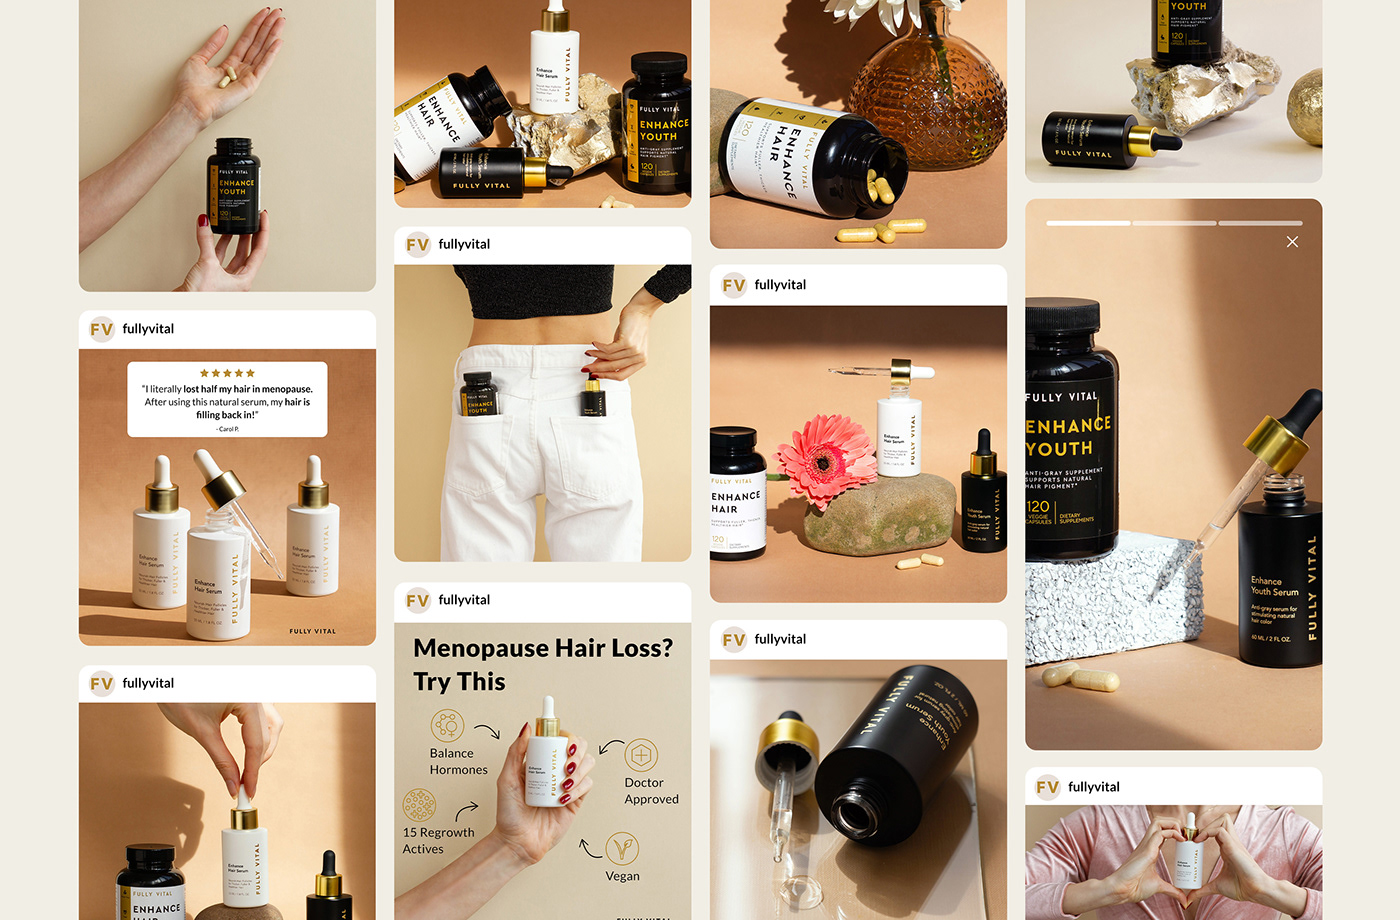 Product Photography product packaging photo styling art direction  Supplement label design serum brand identity Social media post marketing   fashion and beauty